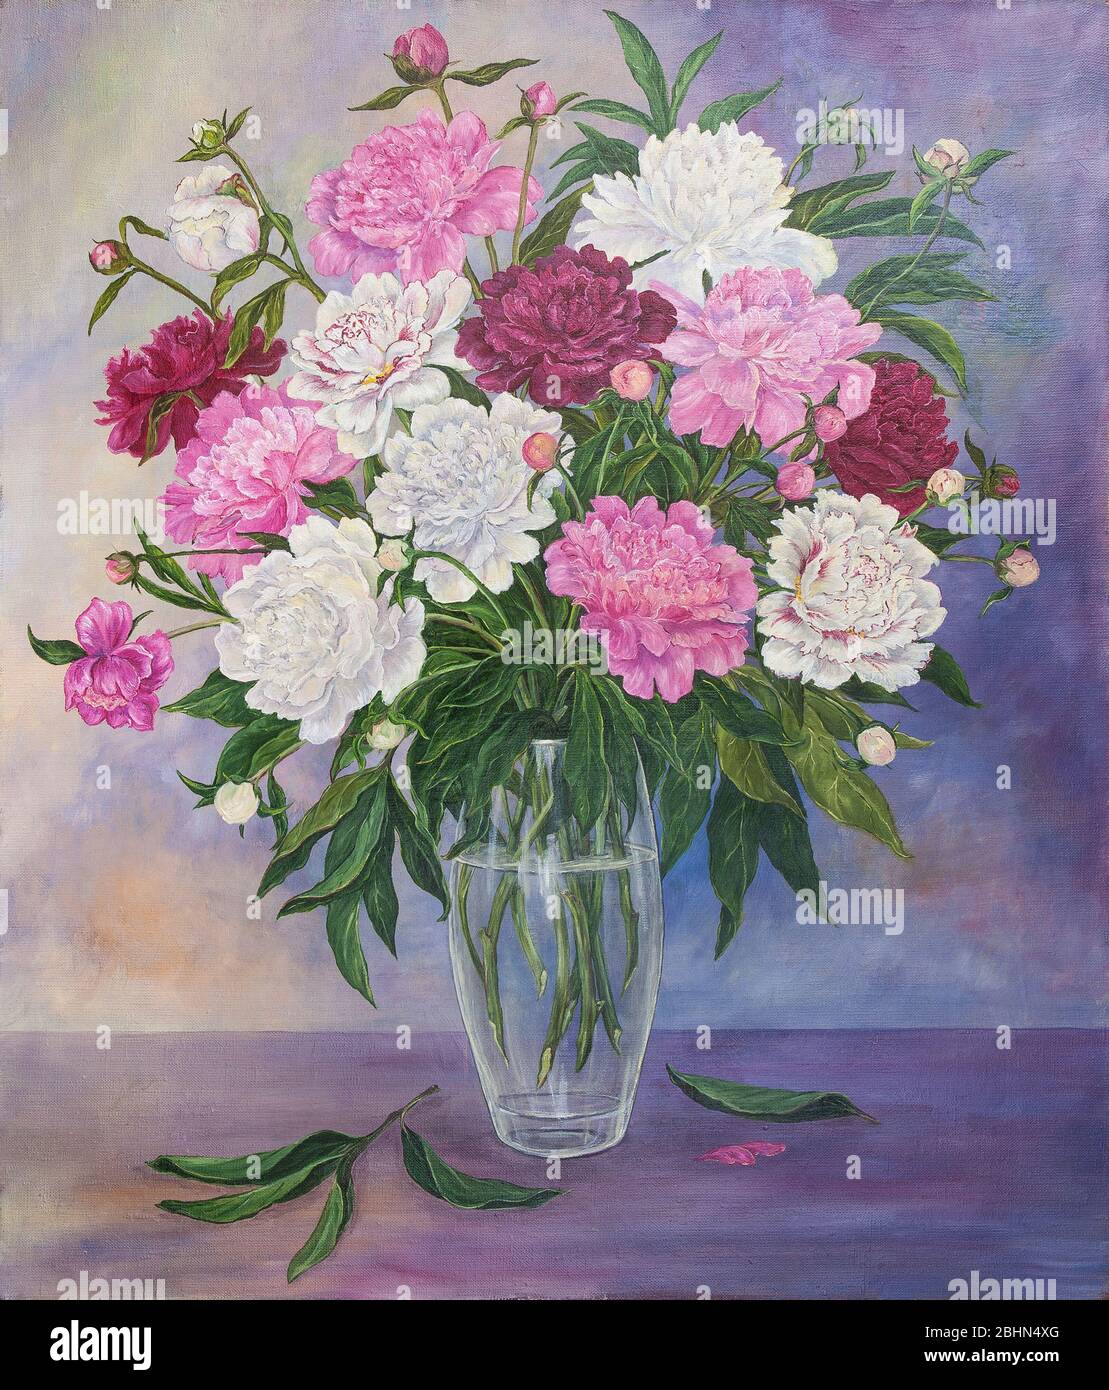 Still life with beautiful pink and white peonies in glass vase. Original oil painting. Stock Photo